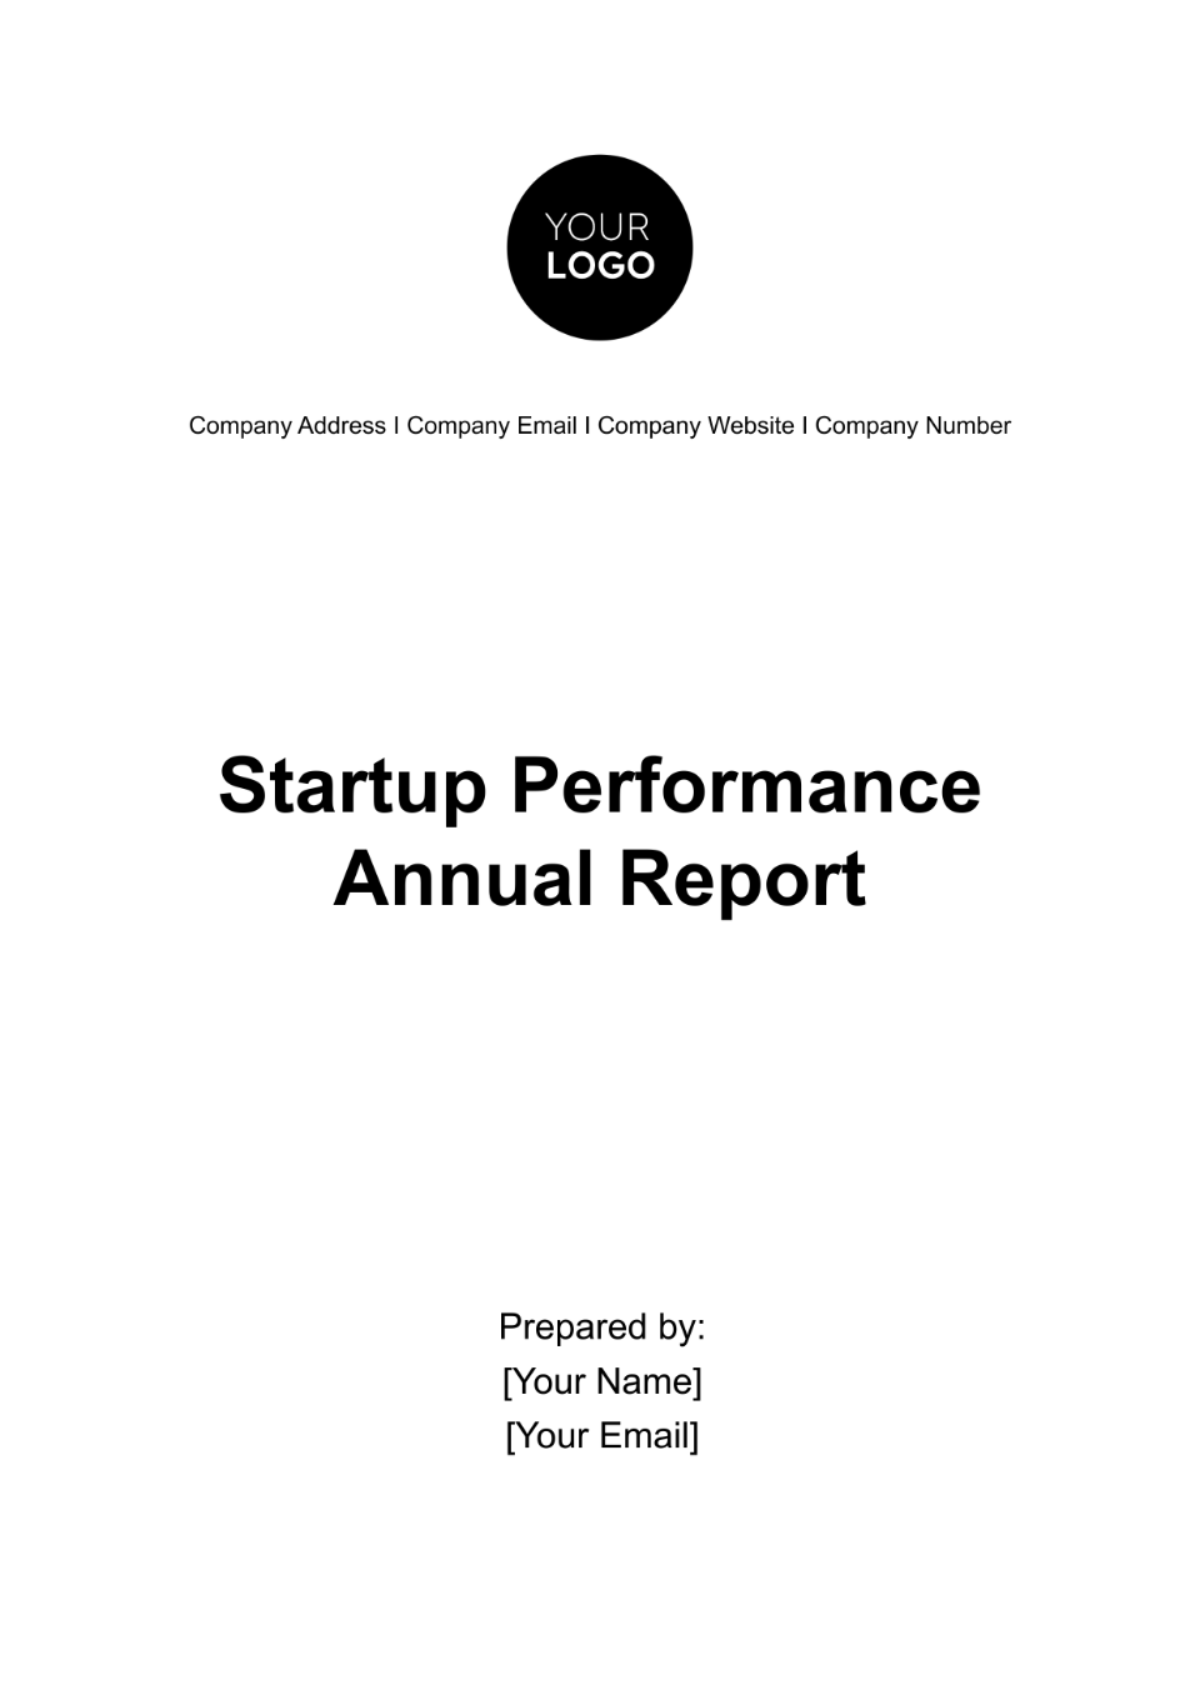 Startup Annual Performance Report Template